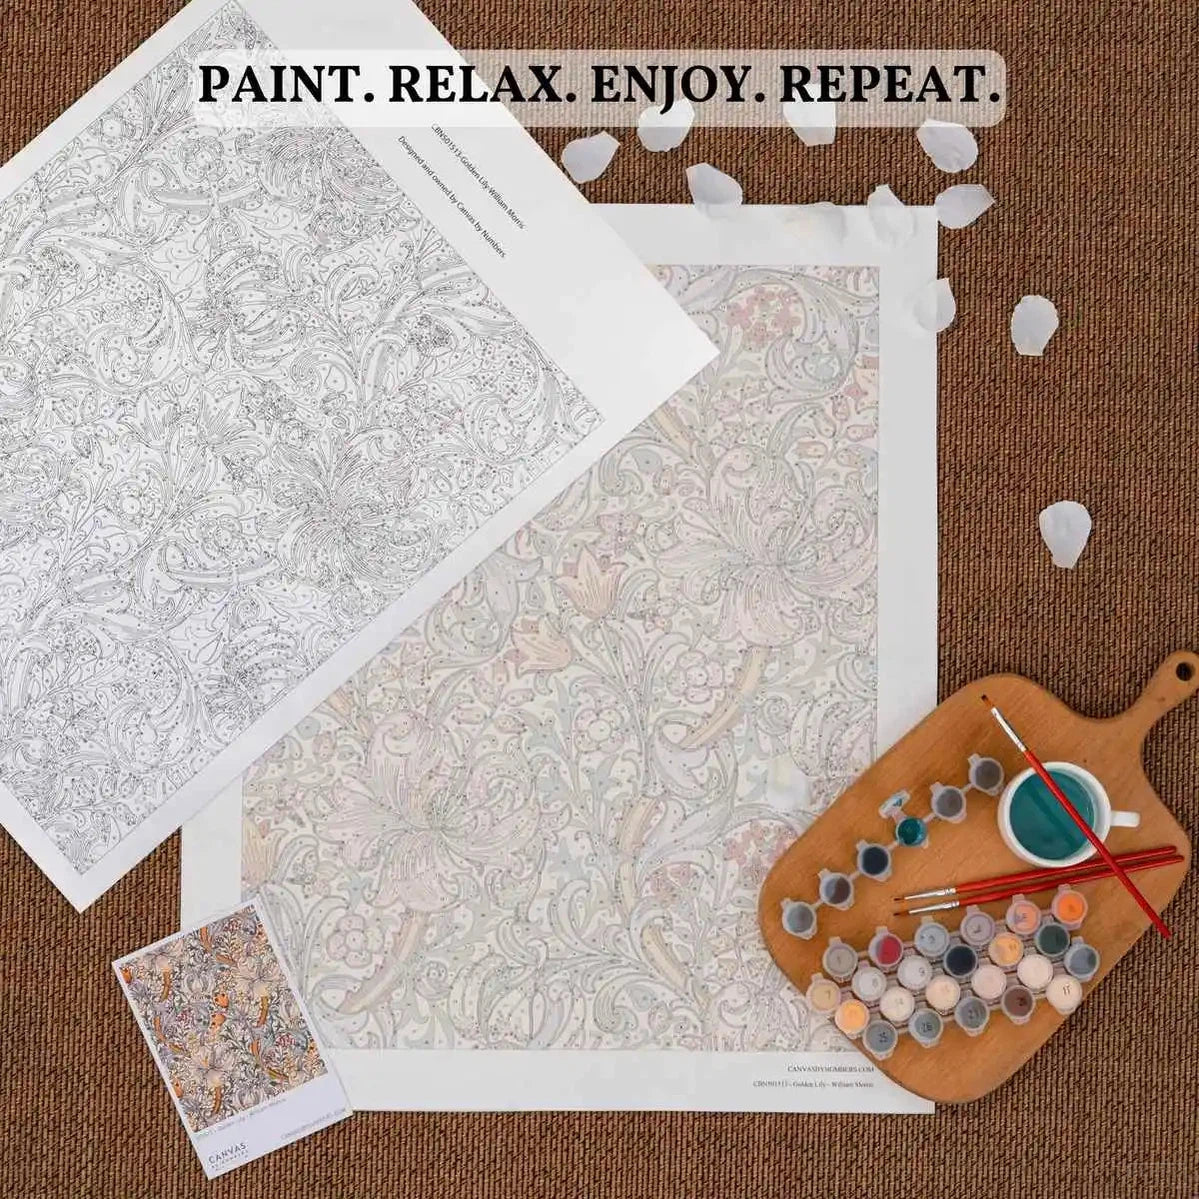 The Great Pali - Paint by Numbers-You'll love our The Great Pali - John La Farge paint by numbers kit. Shop more than 500 paintings at Canvas by Numbers. Up to 50% Off! Free shipping and 60 days money-back.-Canvas by Numbers